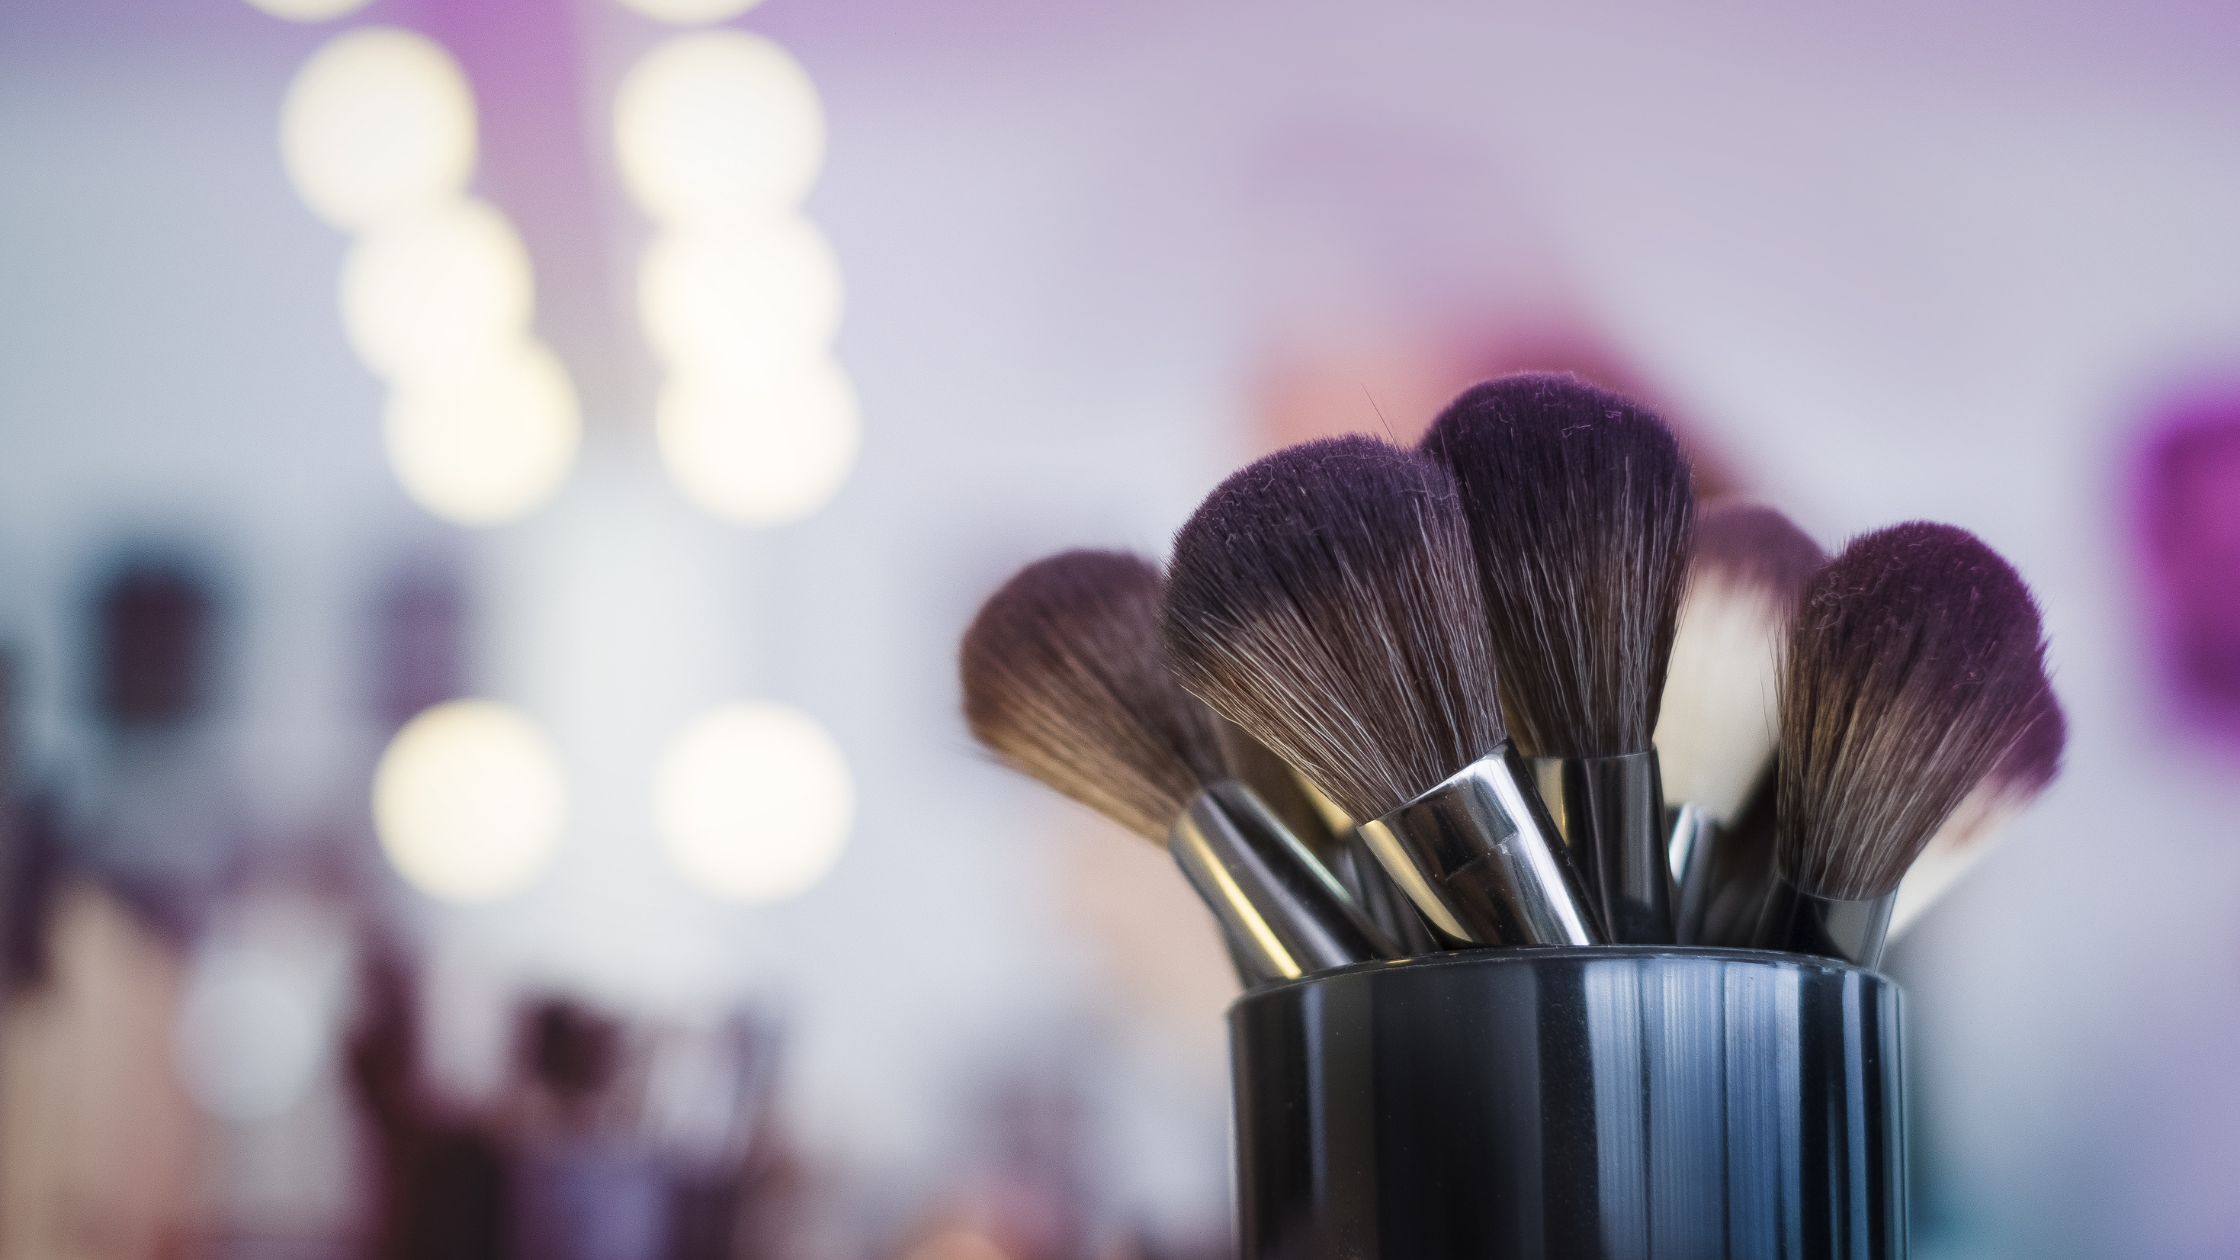 Close-up of makeup brushes in front of a blurred background.